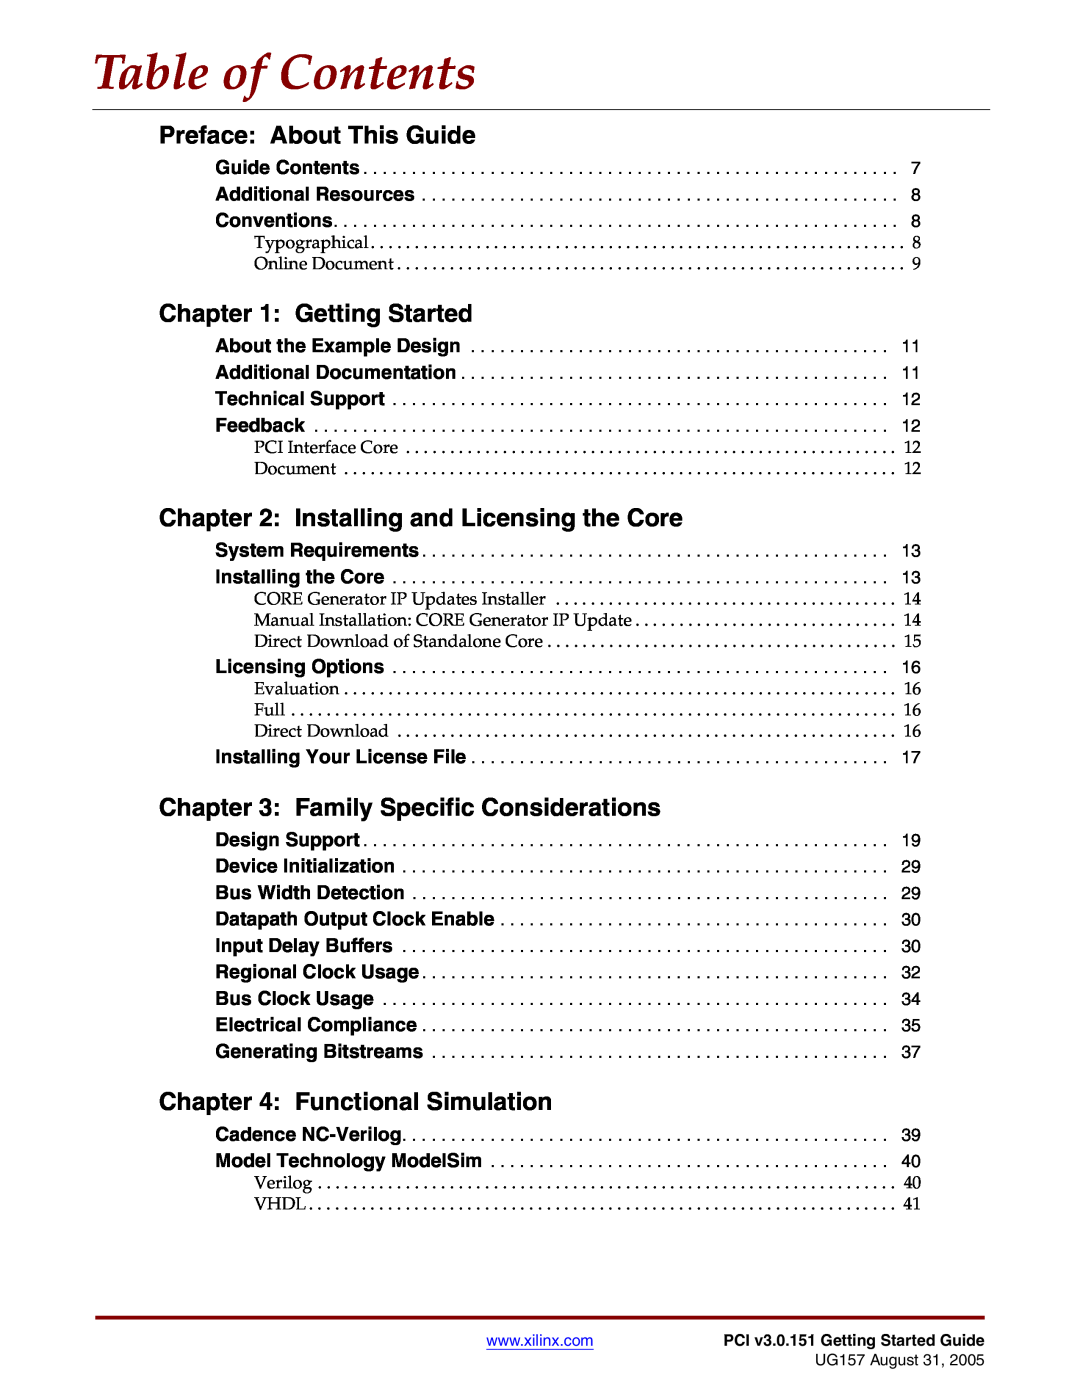 Xilinx PCI v3.0 manual Table of Contents, Preface About This Guide, Getting Started, Installing and Licensing the Core 